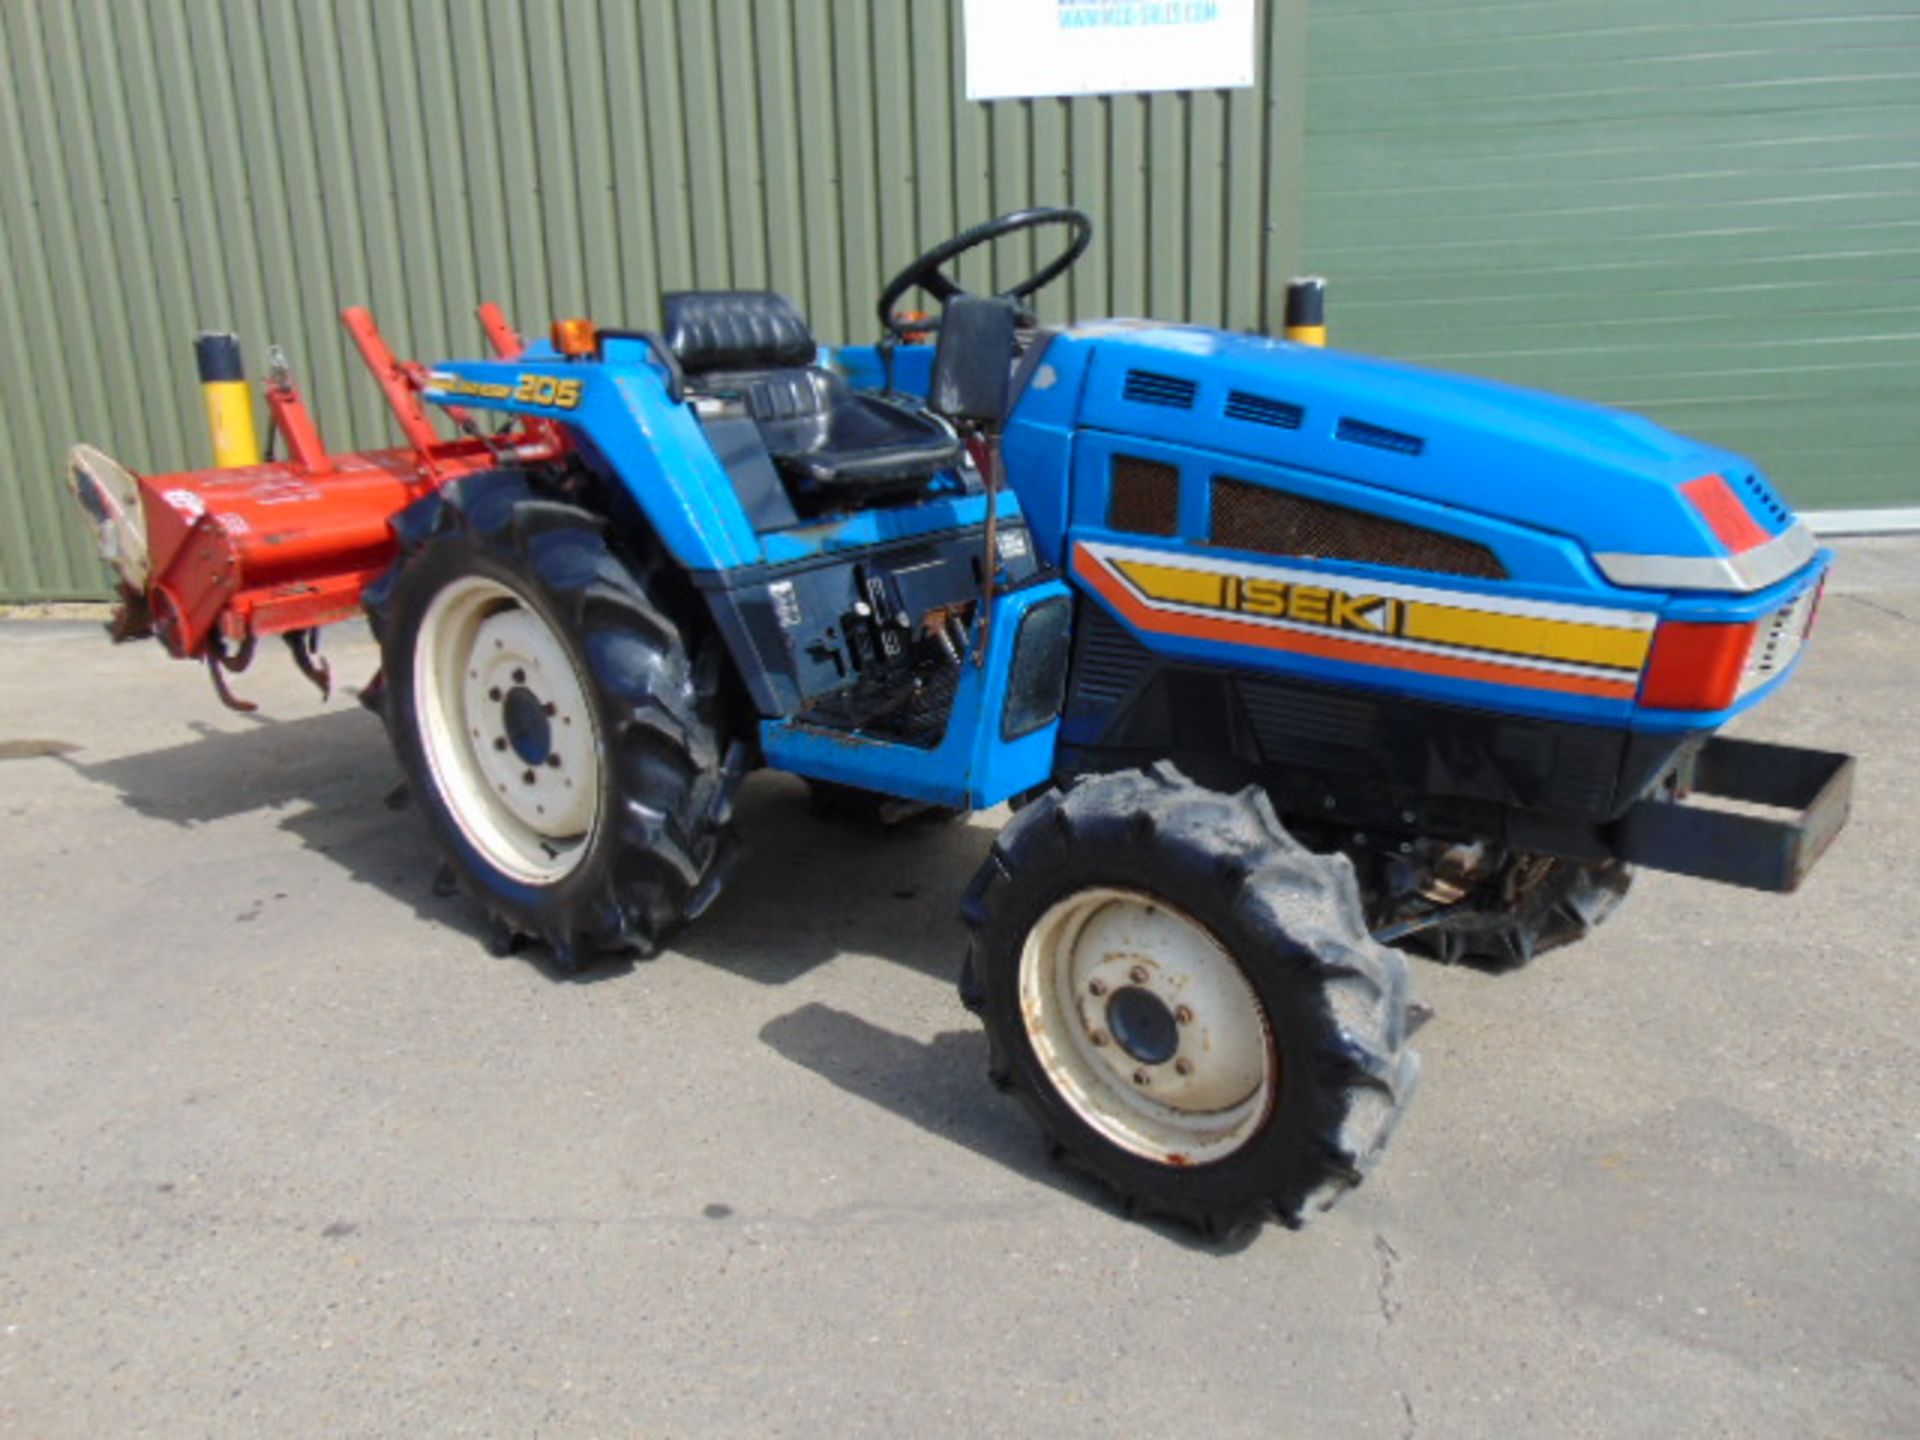 Iseki Landhope 205 4x4 Compact Tractor c/w Rotavator ONLY 724 HOURS!